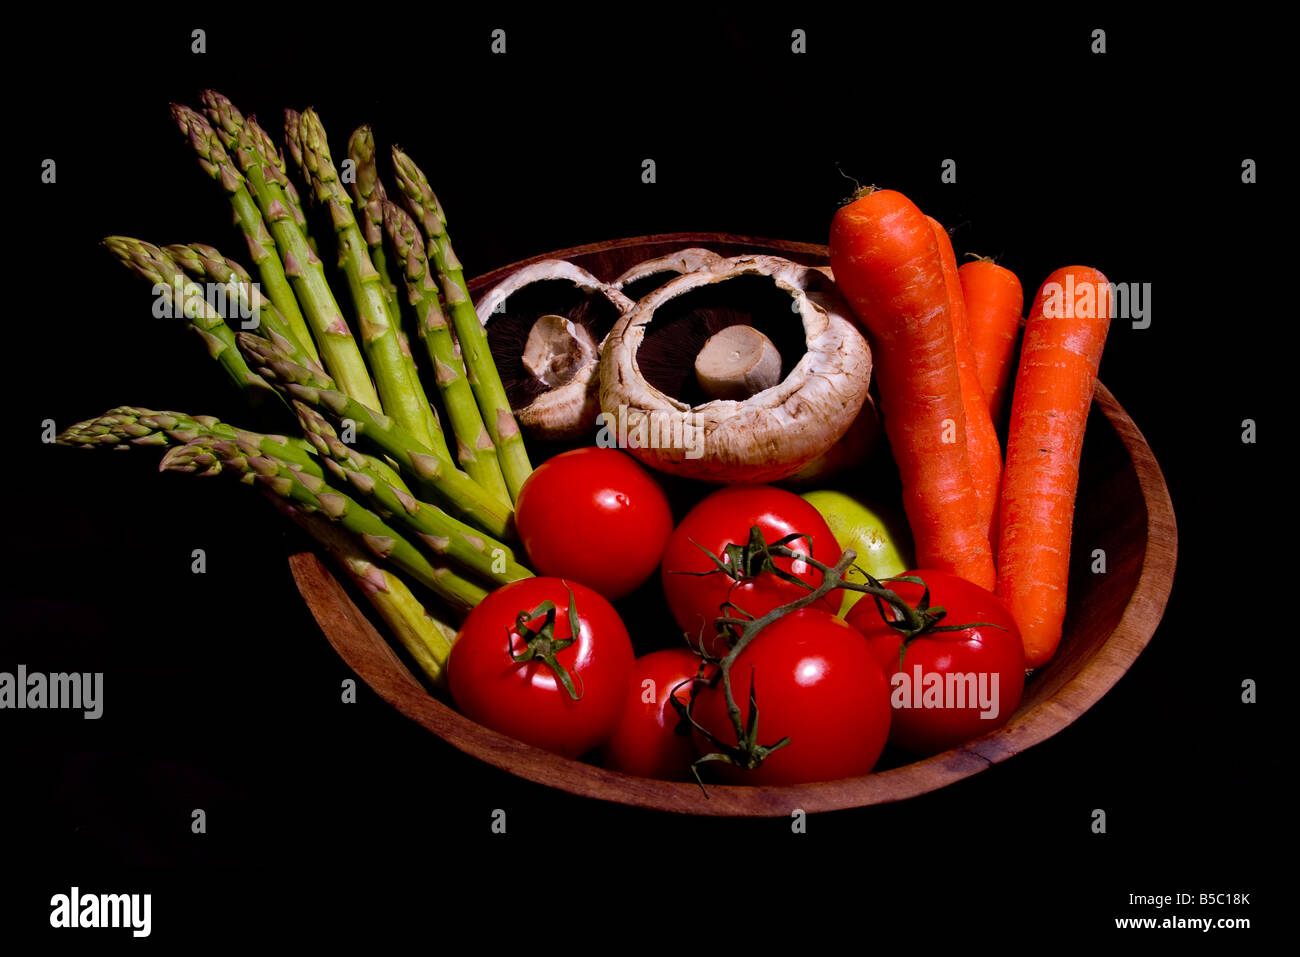 Healthy homegrown organic genuine color vegetables tomatoes mushrooms asparagus carrots in a wooden bowl with black background Stock Photo